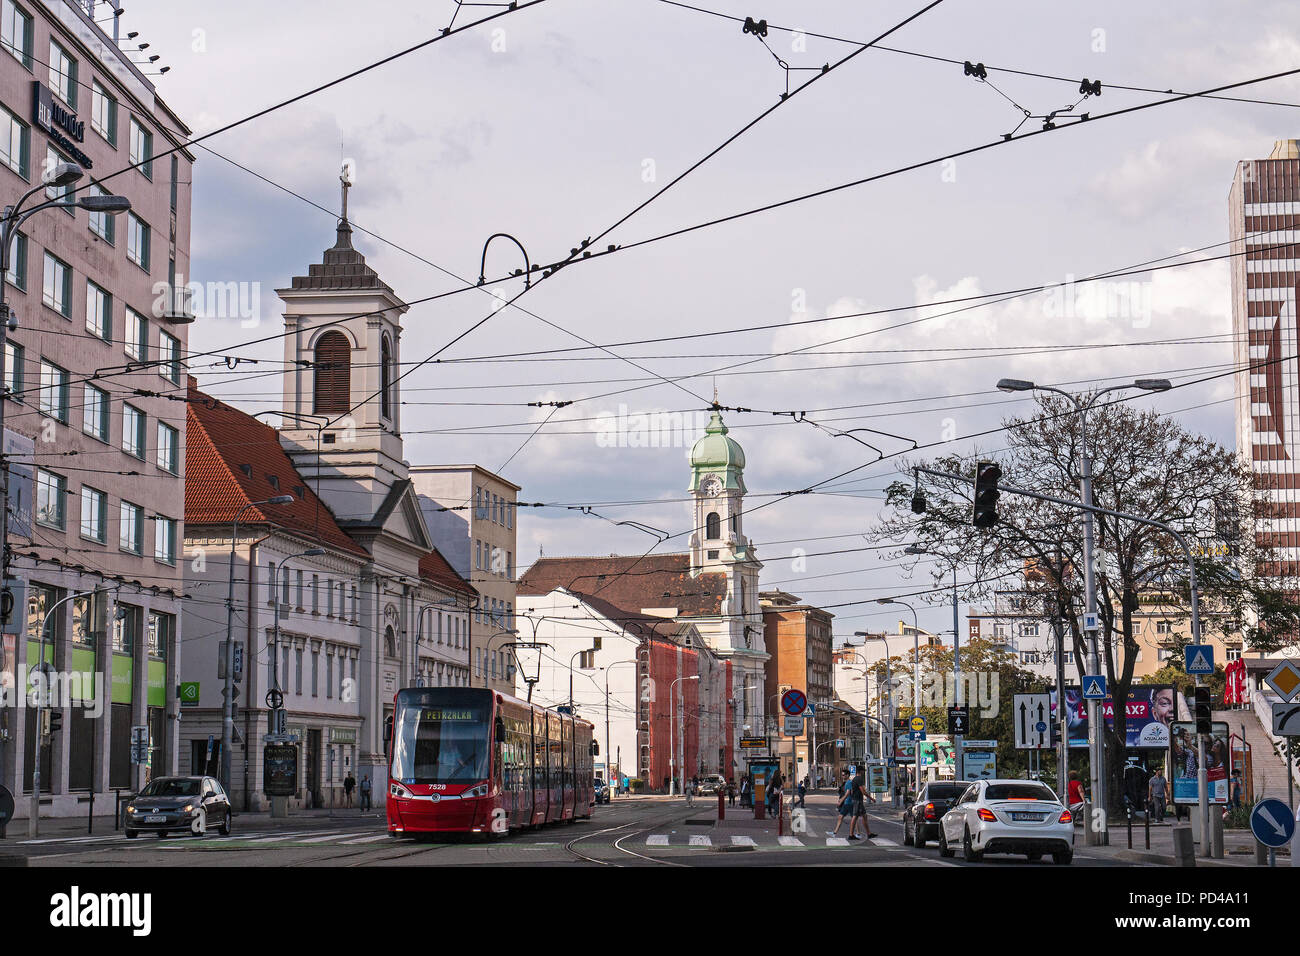 Air trains criss crossing overhead in Bratislava making  urban spaces look old fashioned. Stock Photo